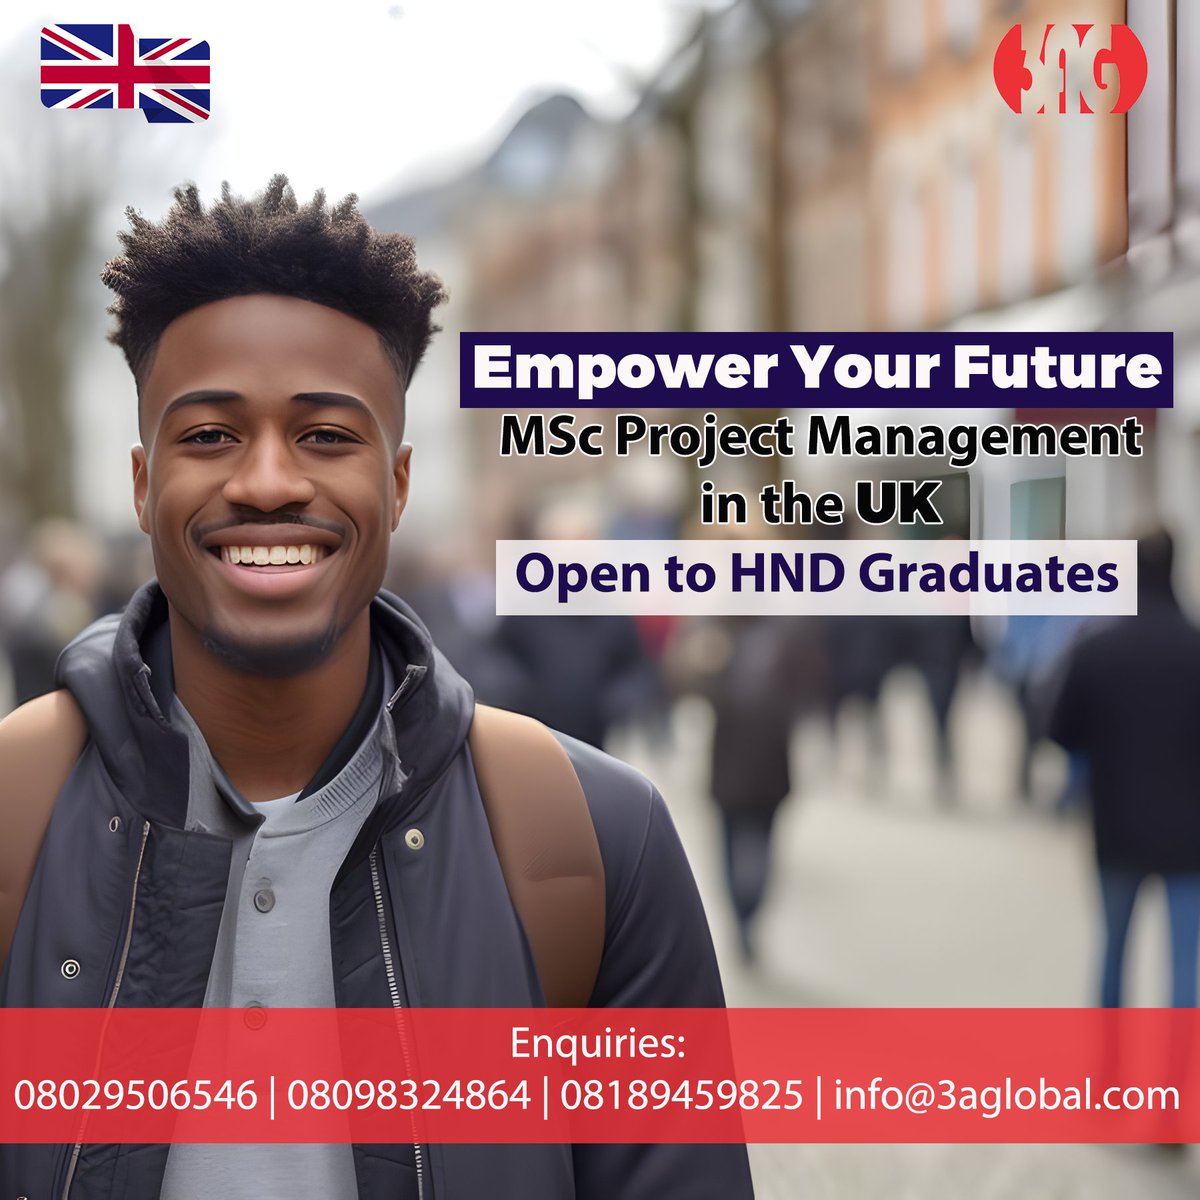 Dreaming of a Master's degree but worried about your qualifications? Don't fret! With a 2.2 degree or 3rd class + PGD/HND upper credit, you can embark on this exciting journey.

#studyintheuk #MastersDegree #StudyAbroad #UKEducation #ManagementStudies #ProjectManagement